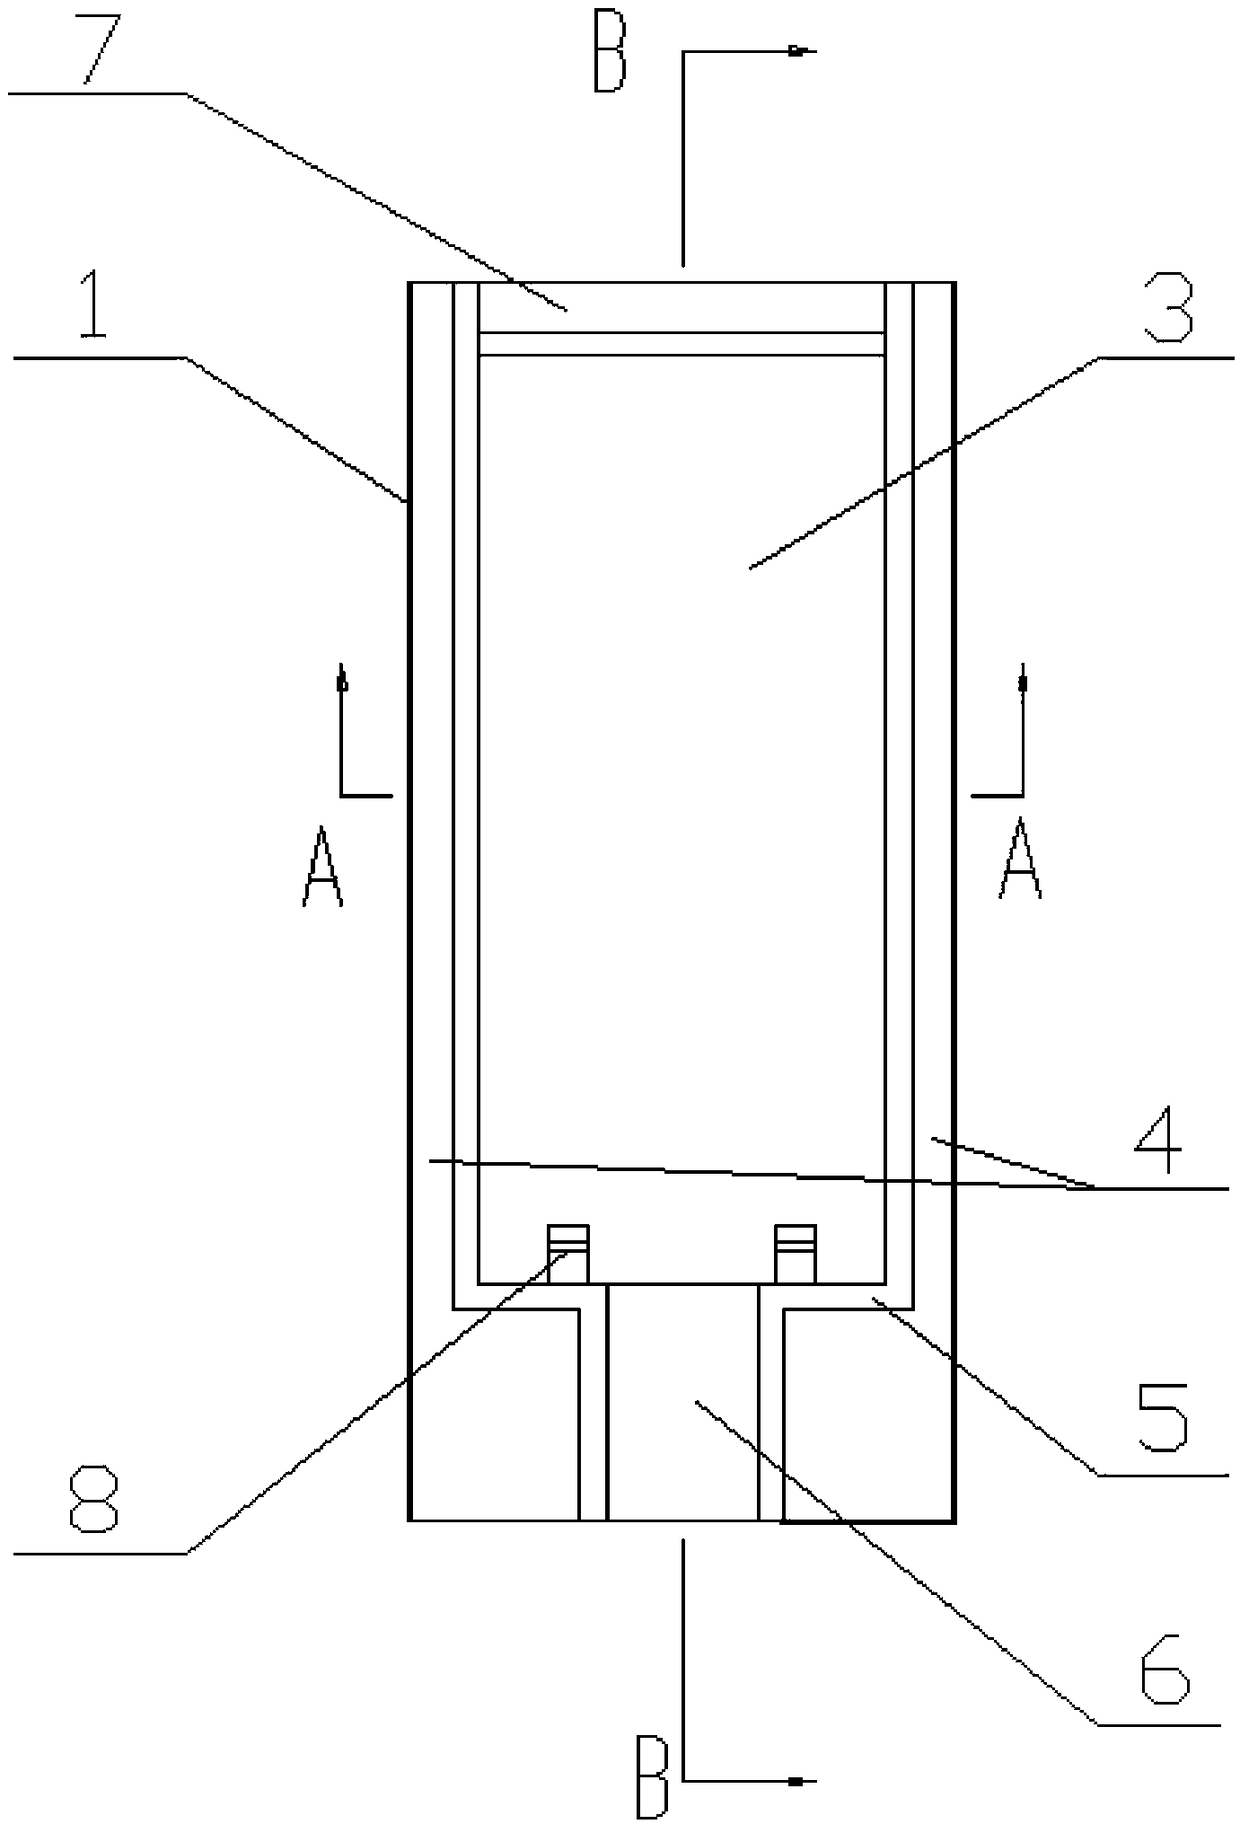 A pre-embedded box structure, a door body for a refrigerator and a refrigerator